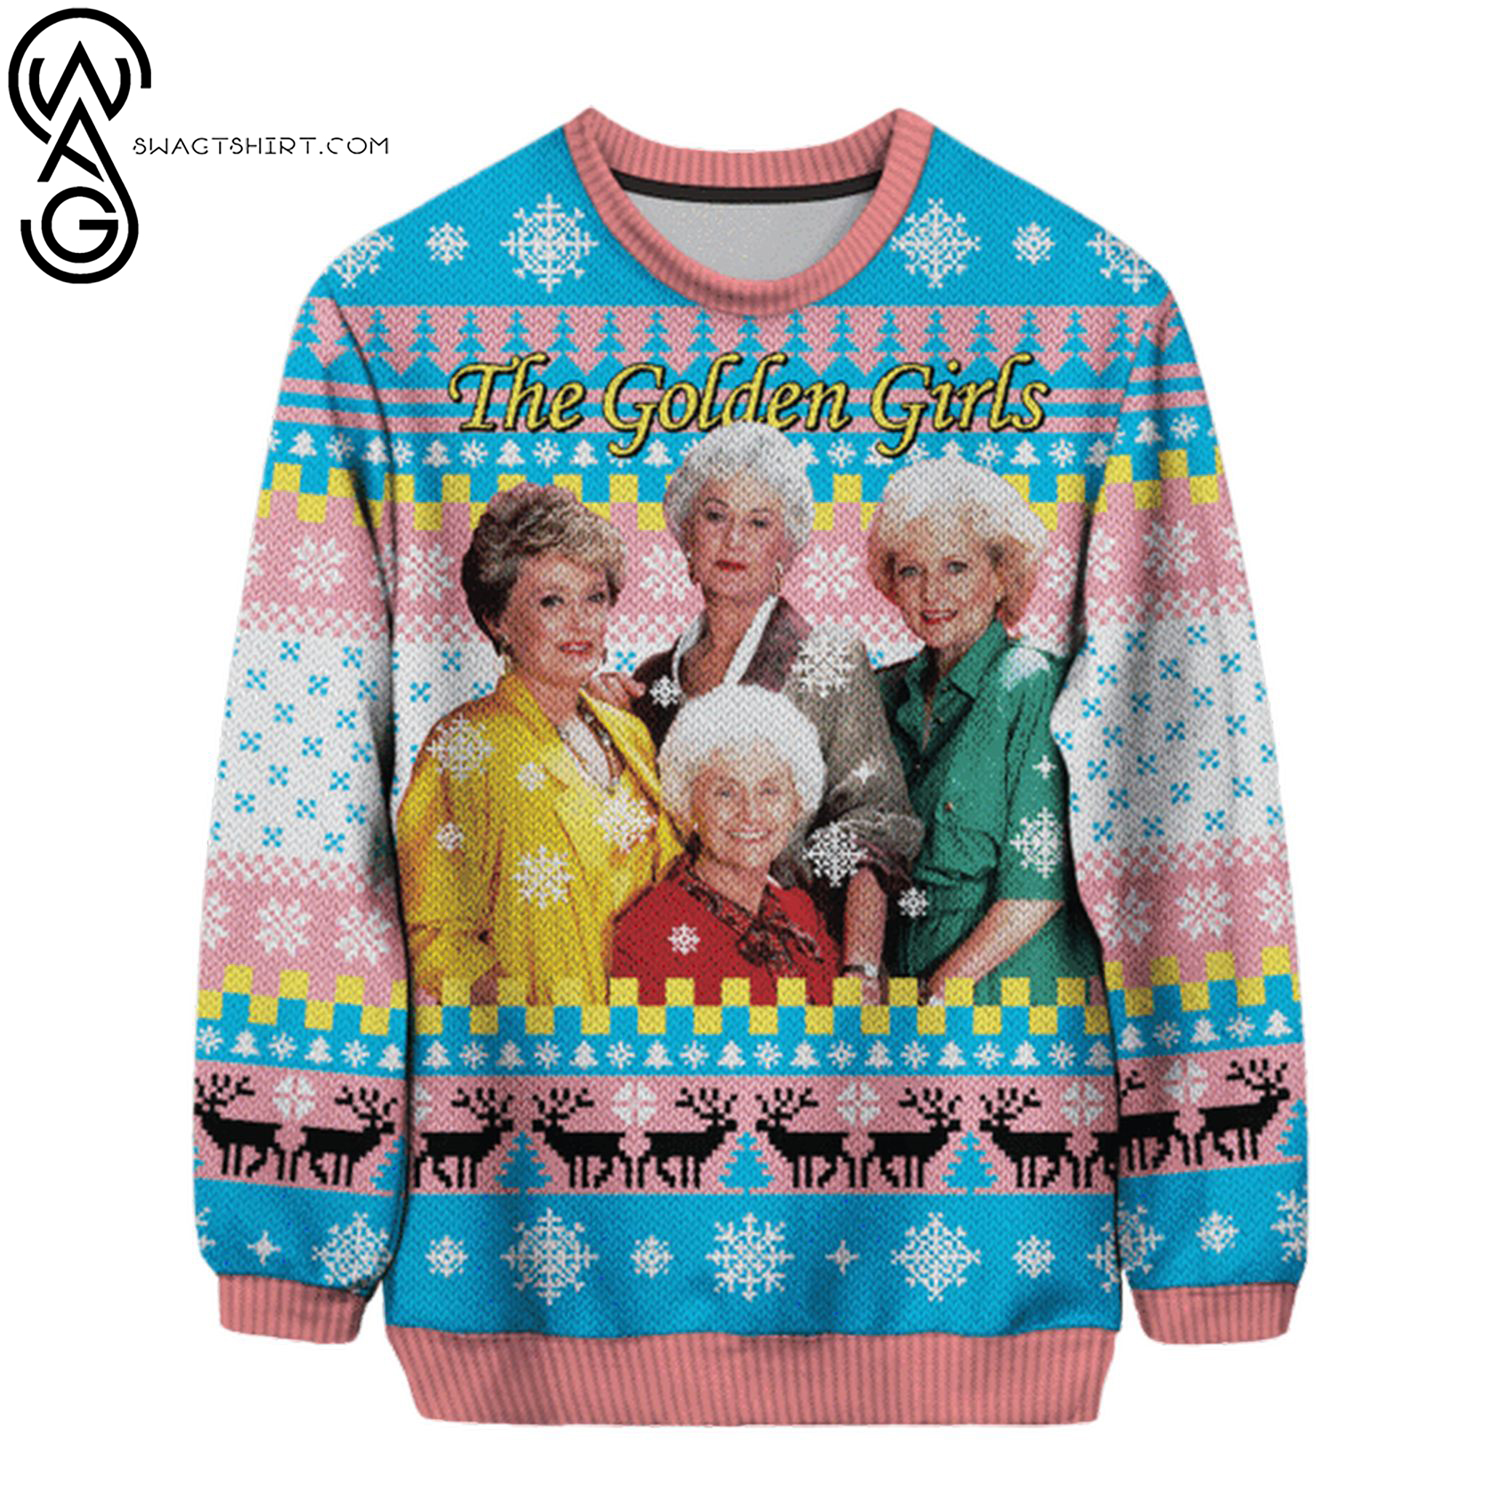 The golden girls full printing ugly christmas sweater